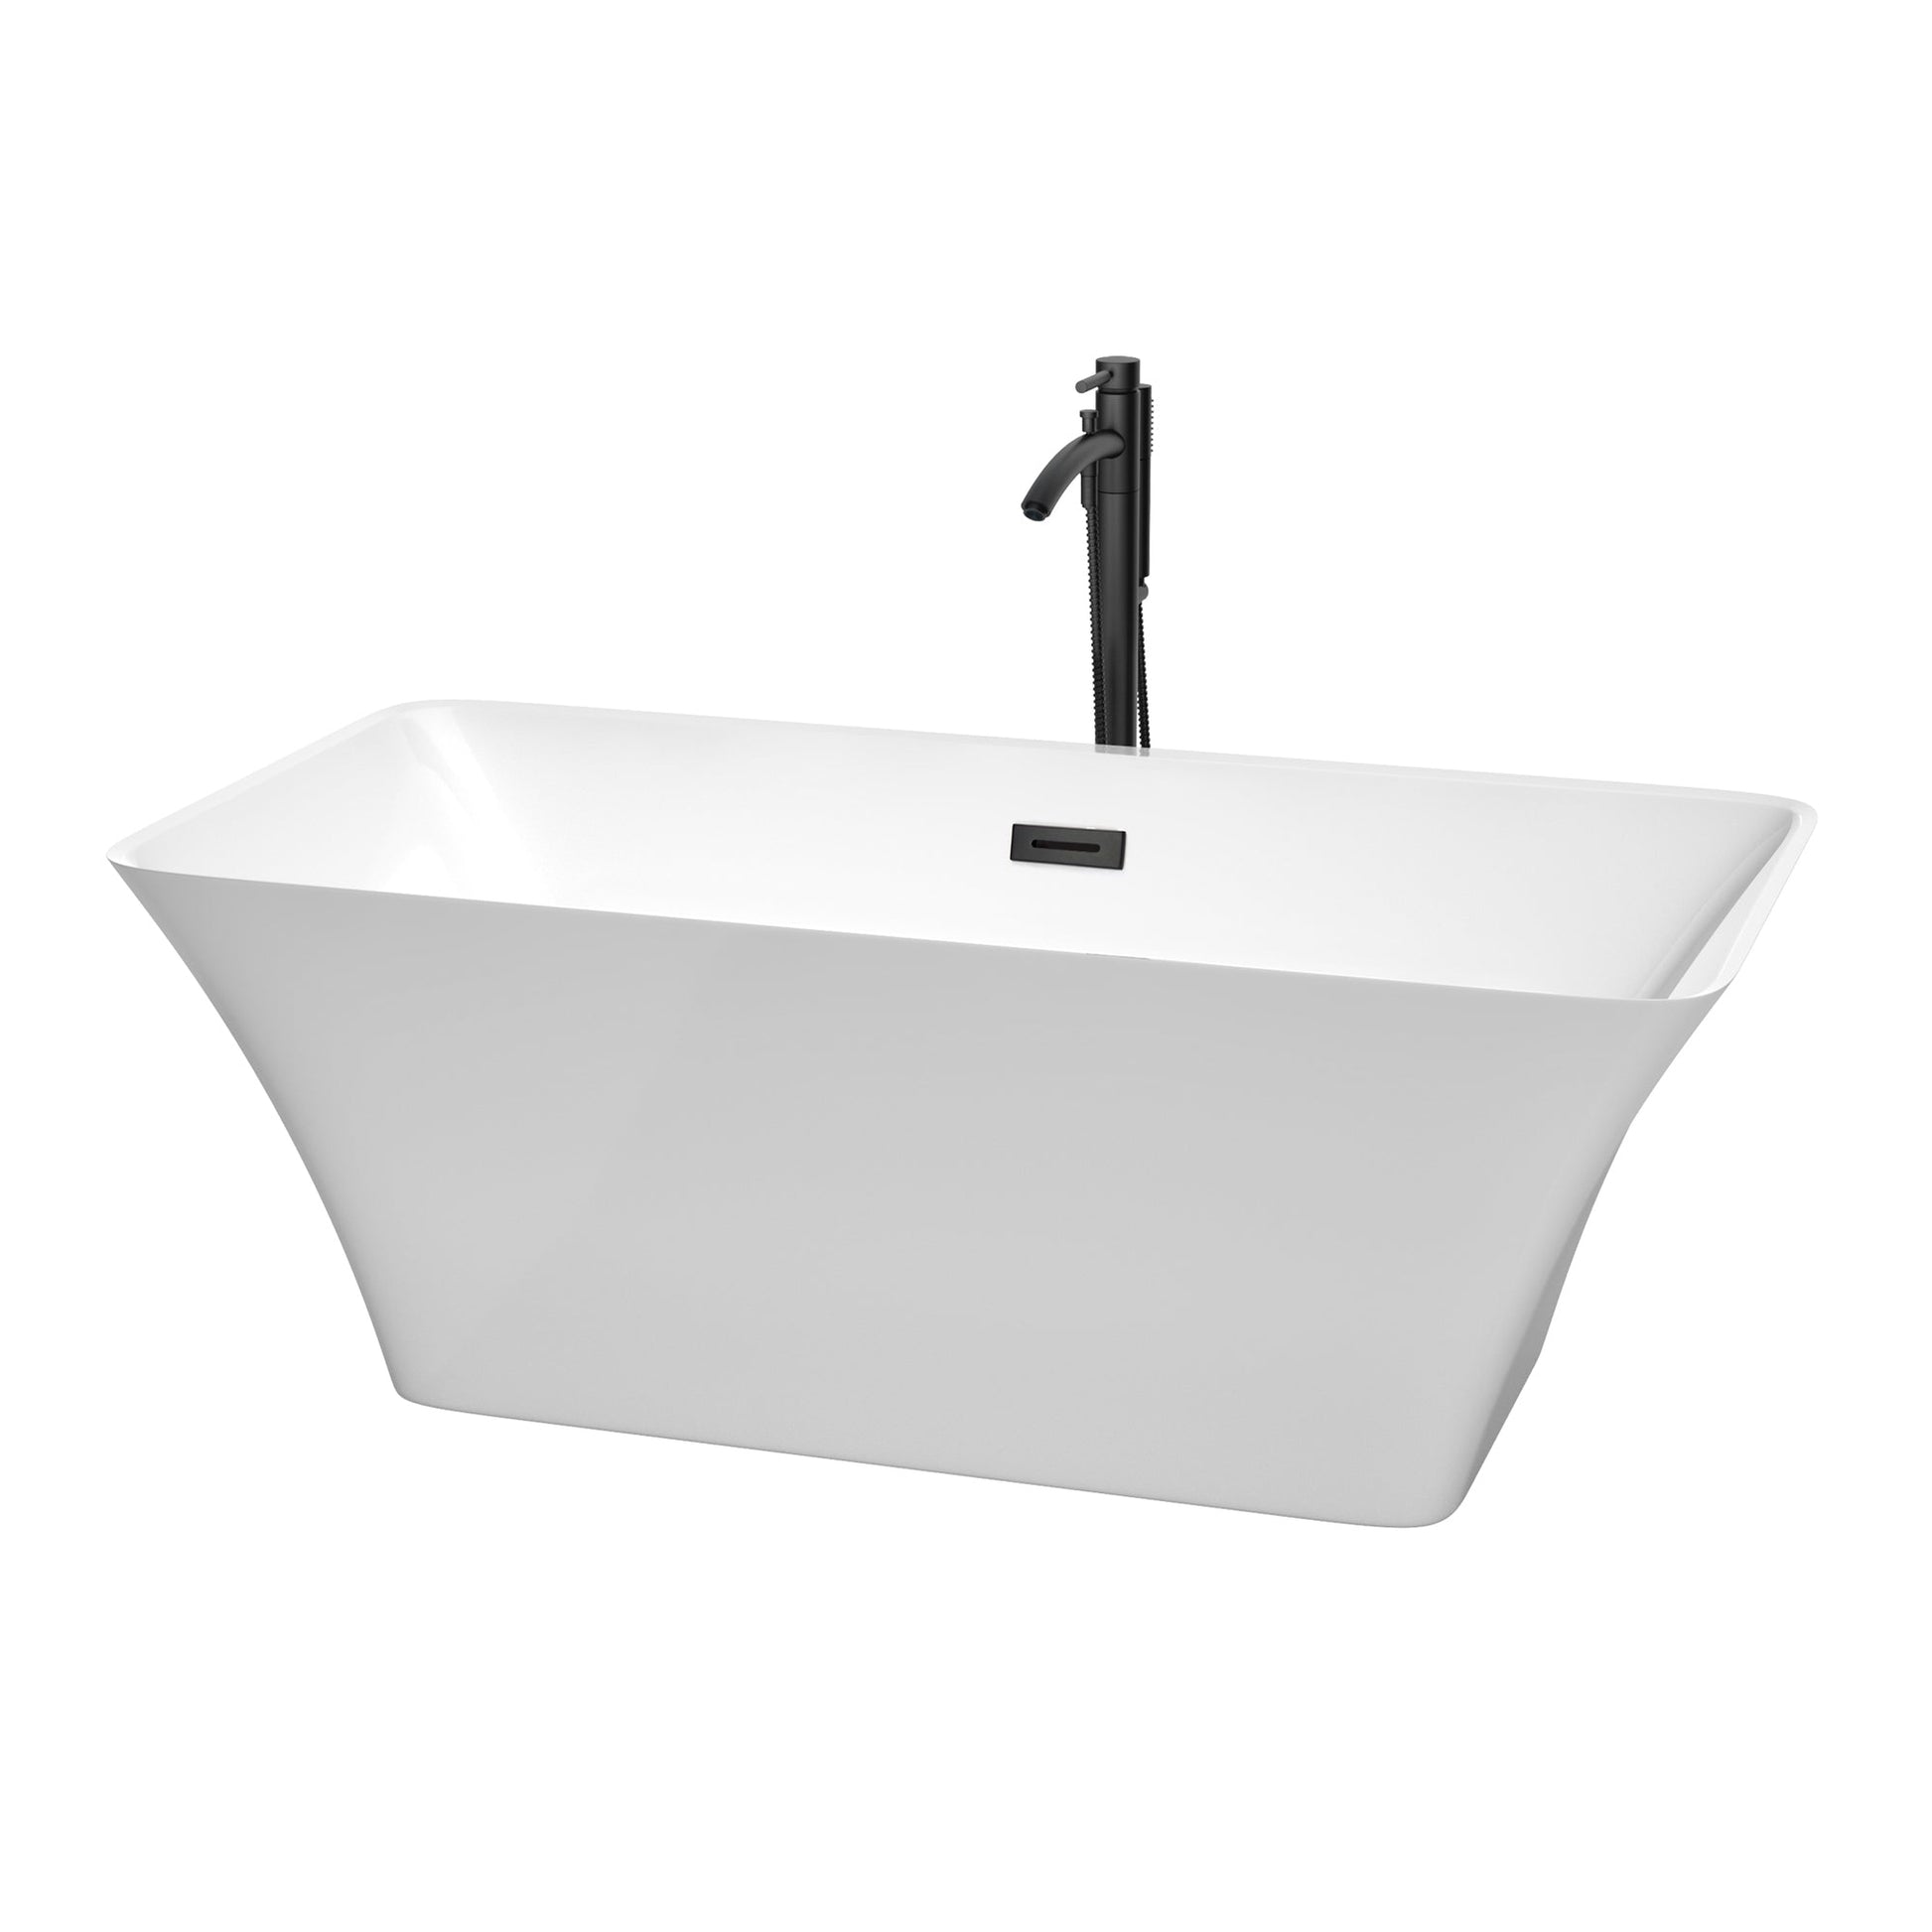 Wyndham Collection Tiffany 59" Freestanding Bathtub in White With Floor Mounted Faucet, Drain and Overflow Trim in Matte Black